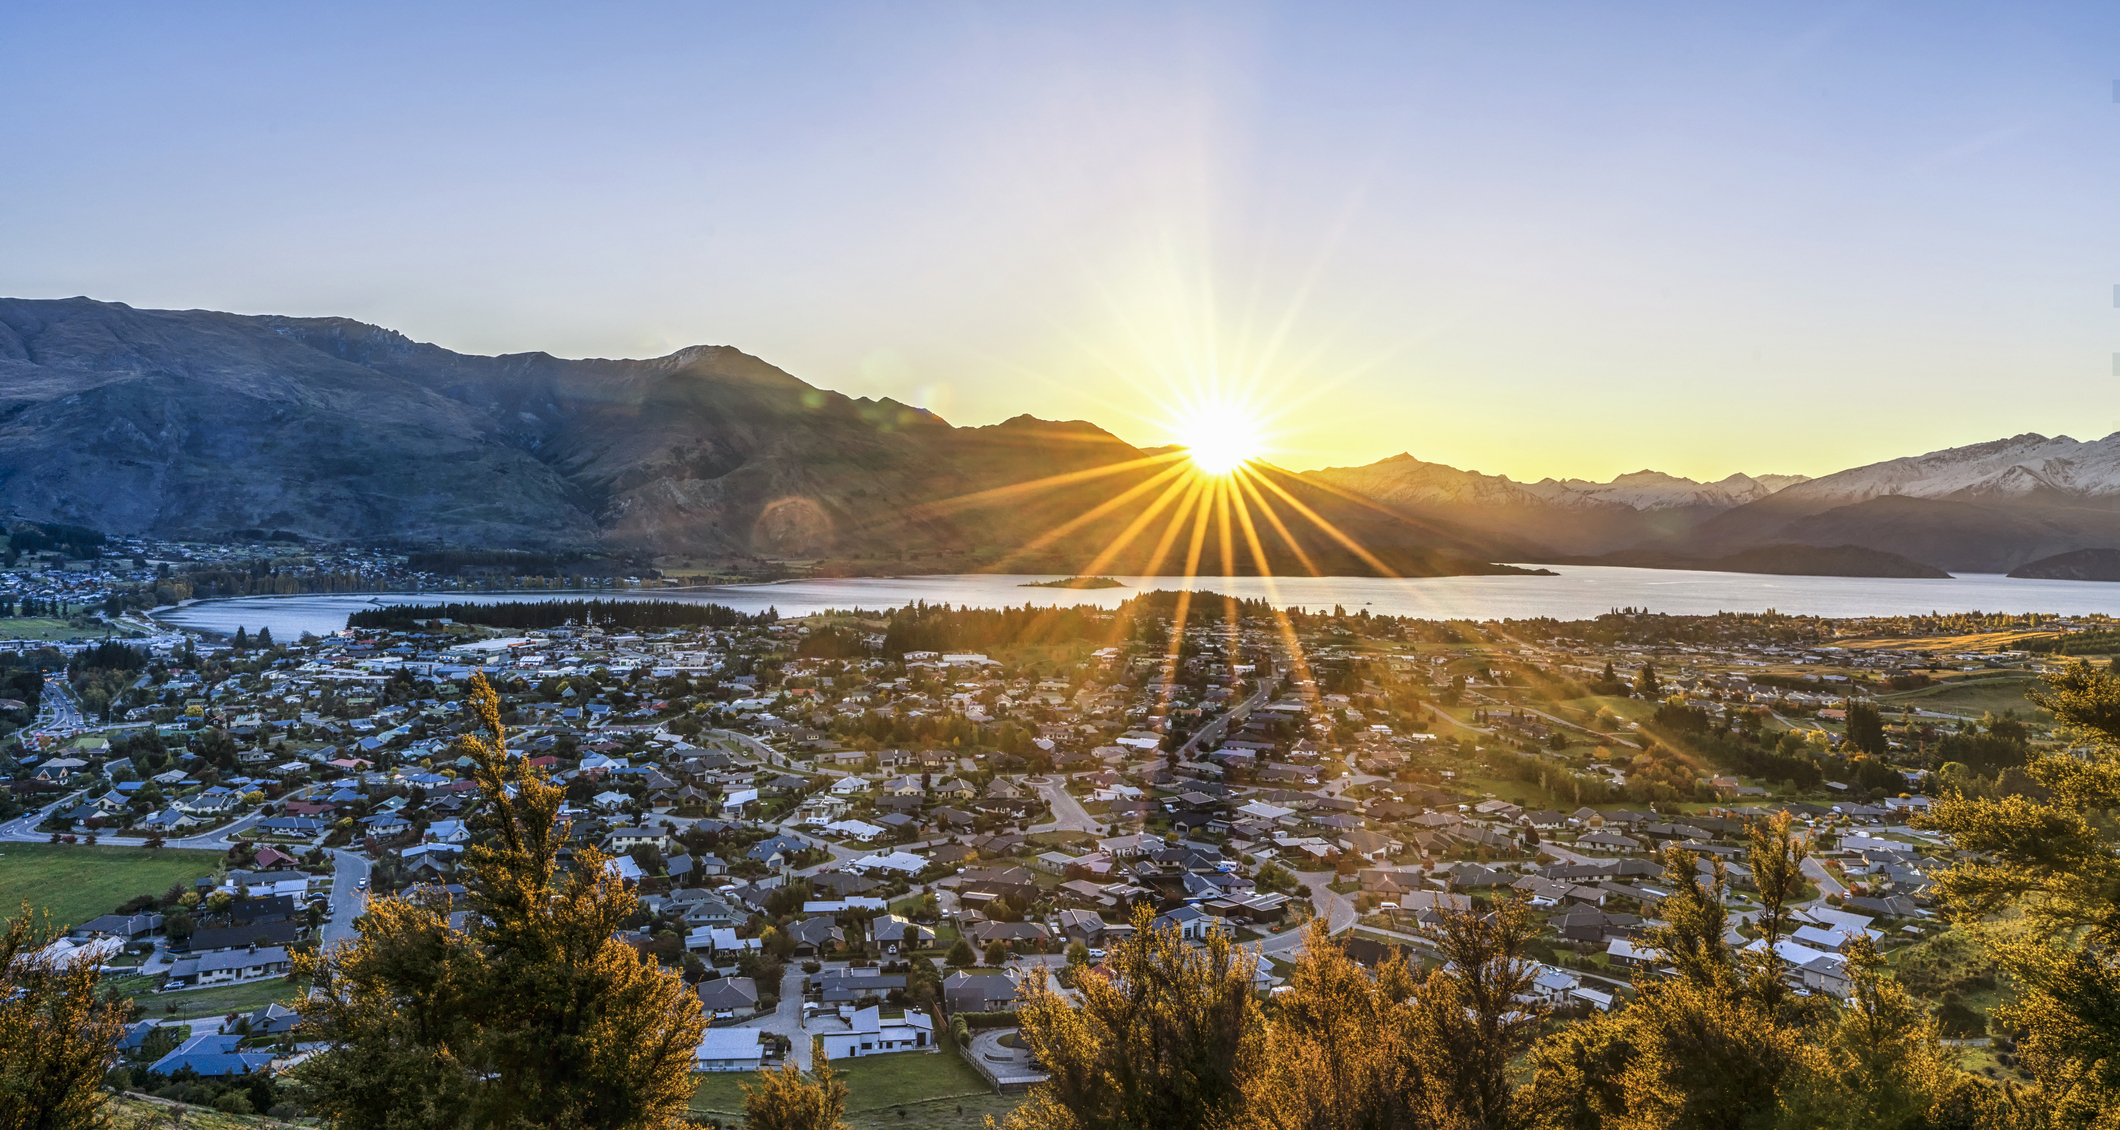 Building a sustainable future in Wanaka with LPG